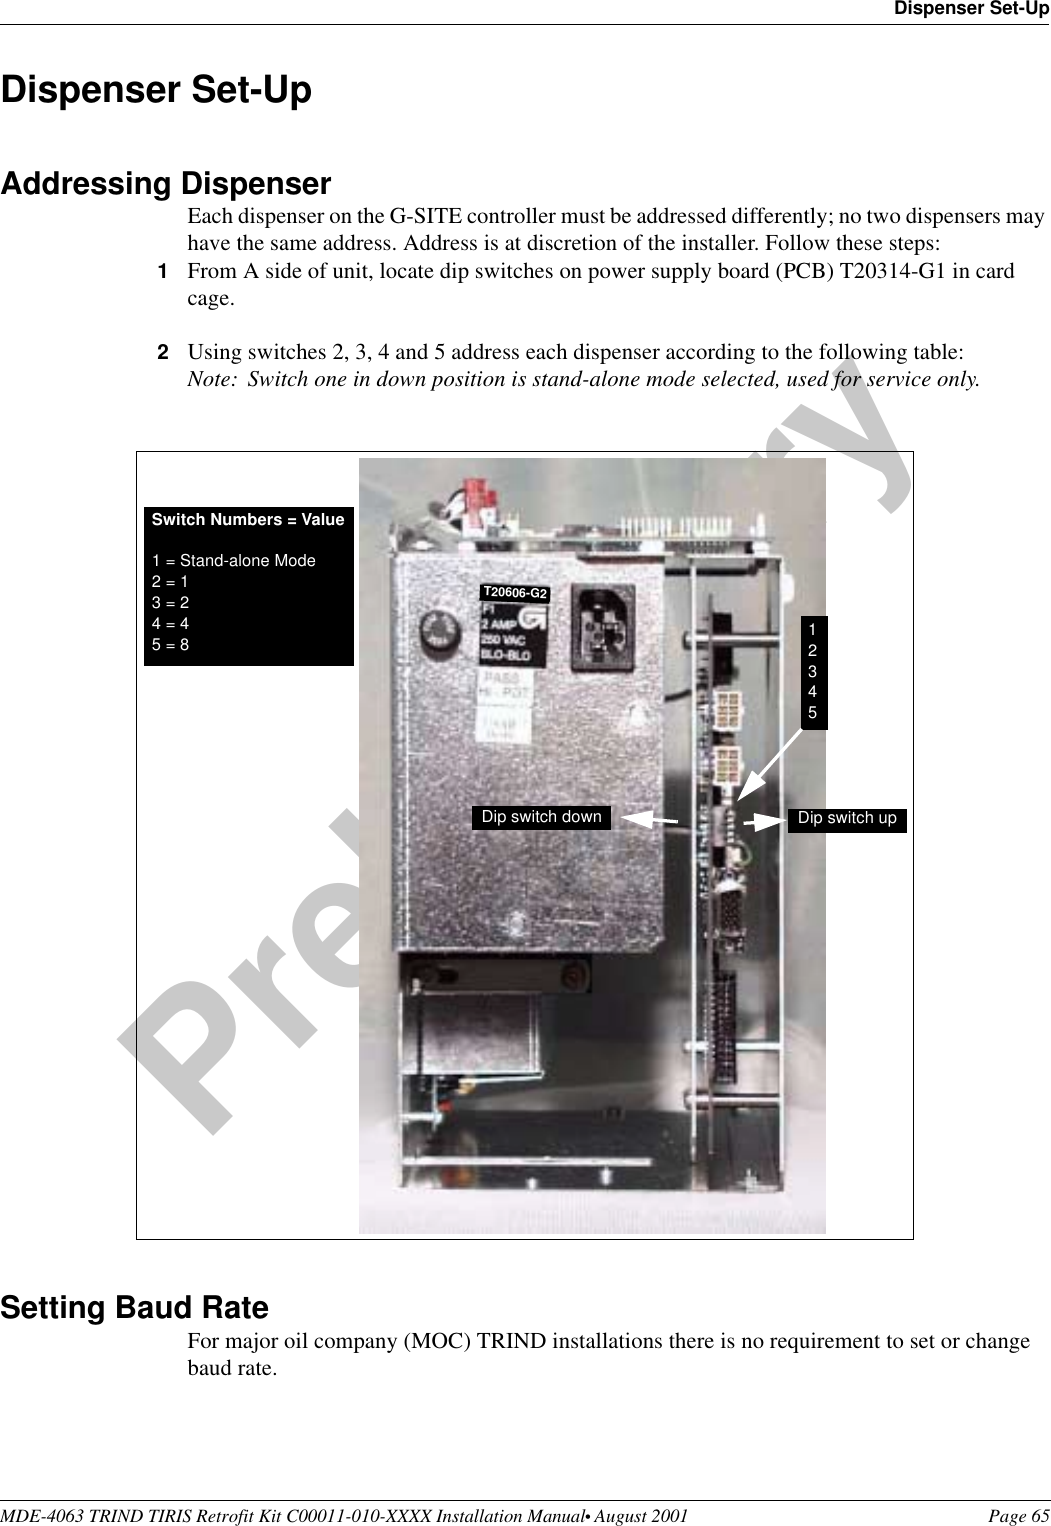 MDE-4063 TRIND TIRIS Retrofit Kit C00011-010-XXXX Installation Manual• August 2001 Page 65Dispenser Set-UpPreliminary08-24-01Dispenser Set-UpAddressing DispenserEach dispenser on the G-SITE controller must be addressed differently; no two dispensers may have the same address. Address is at discretion of the installer. Follow these steps:1From A side of unit, locate dip switches on power supply board (PCB) T20314-G1 in card cage.2Using switches 2, 3, 4 and 5 address each dispenser according to the following table:Note: Switch one in down position is stand-alone mode selected, used for service only.Setting Baud RateFor major oil company (MOC) TRIND installations there is no requirement to set or change baud rate.Switch Numbers = Value1 = Stand-alone Mode2 = 13 = 24 = 45 = 8 12345Dip switch down Dip switch upT20606-G2